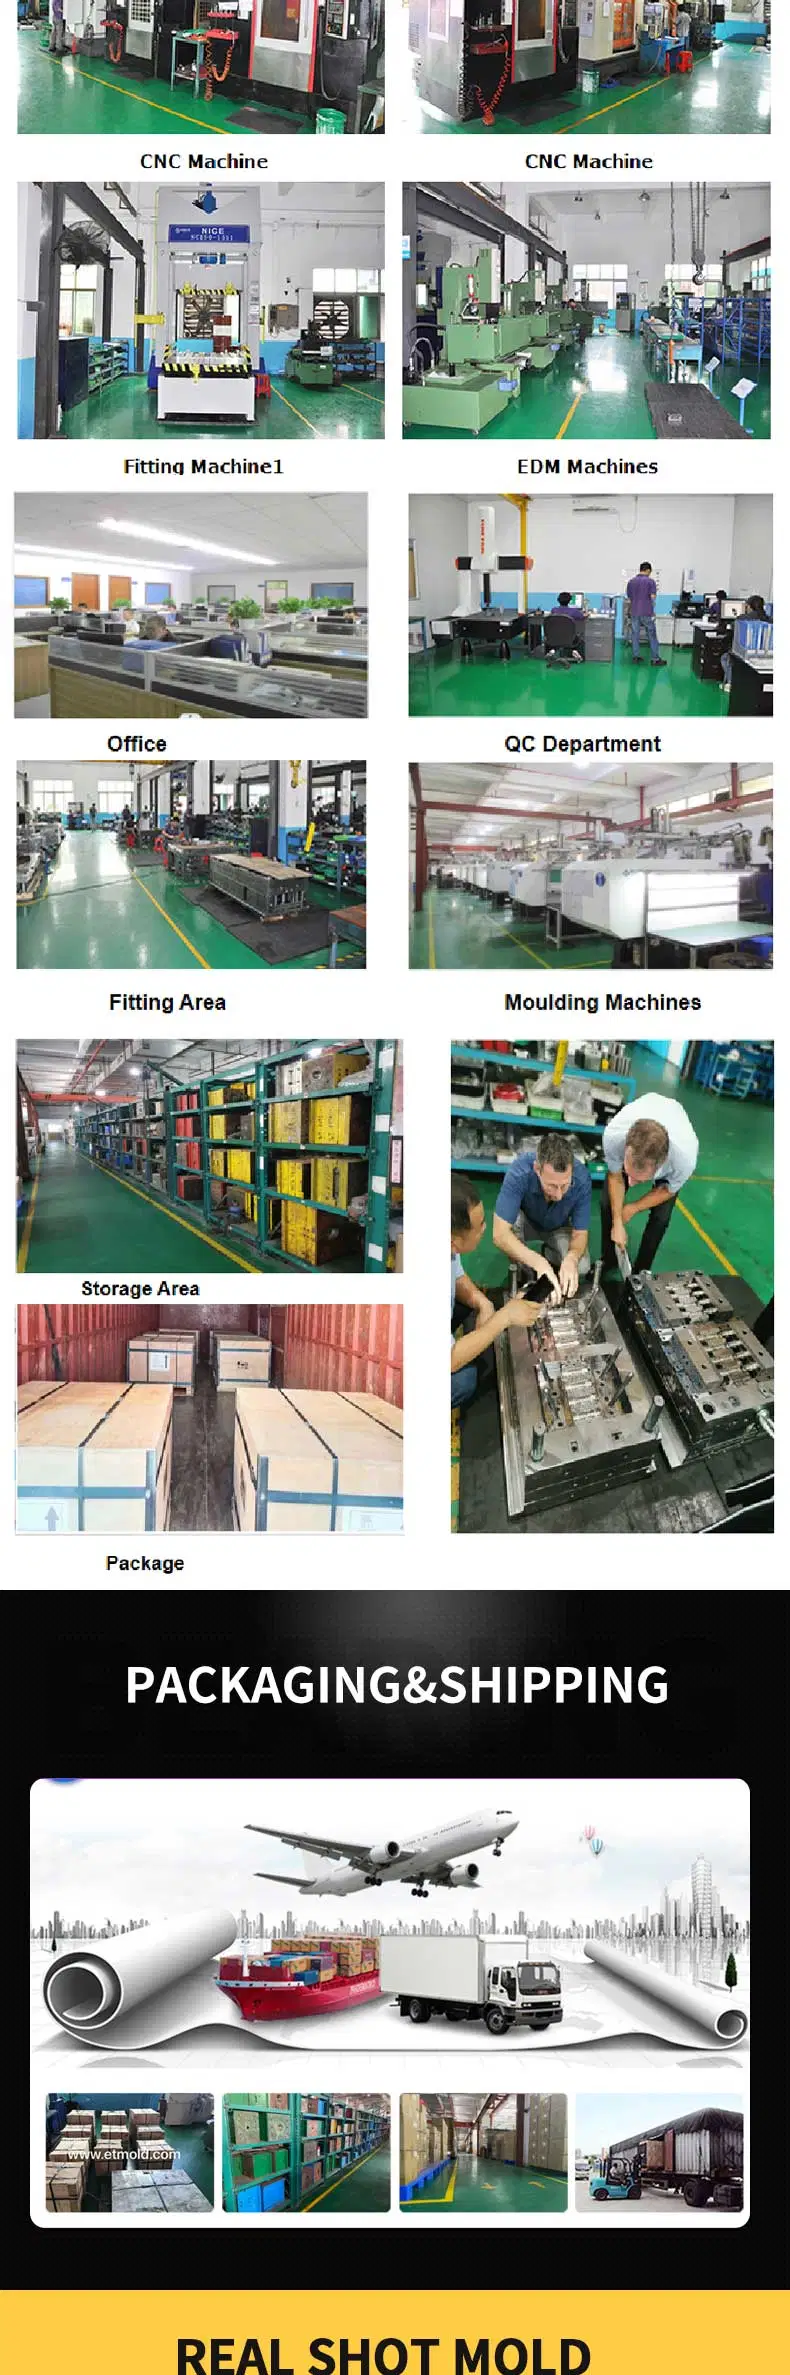 Infusion Apparatus Mold Safety Plastic Material Injection Molding